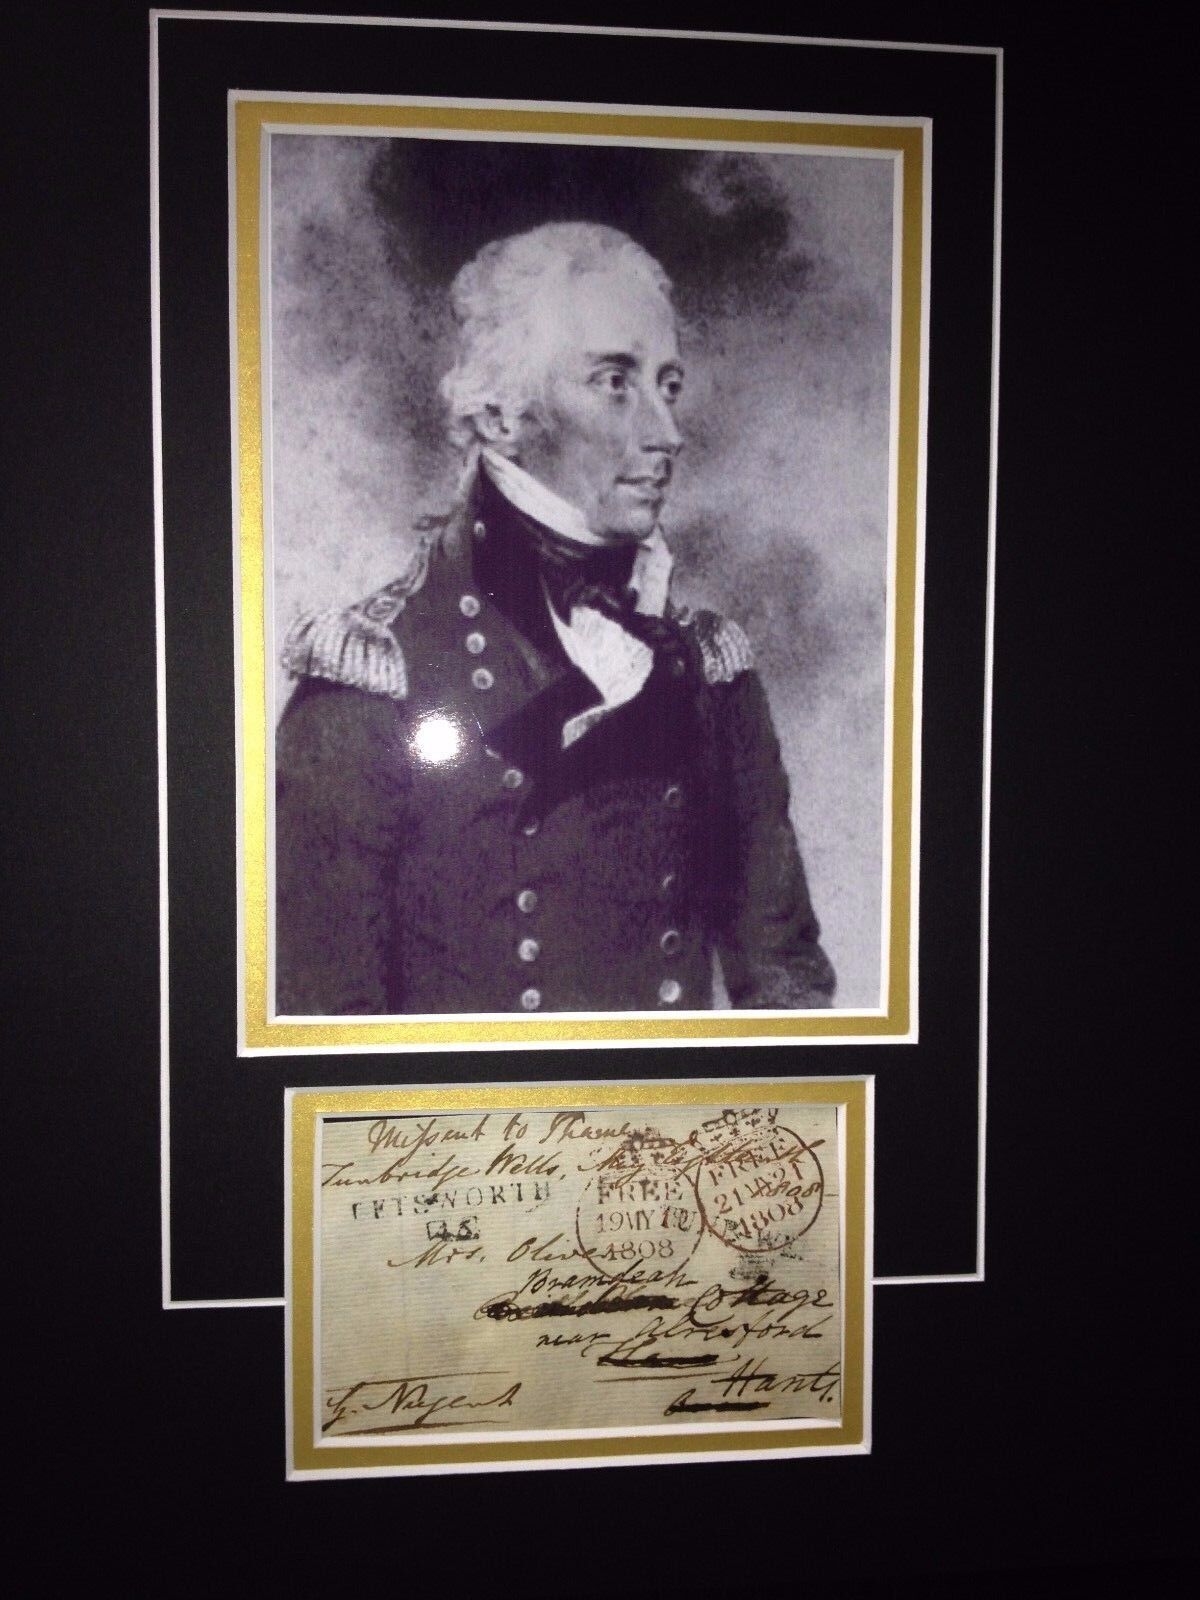 SIR GEORGE NUGENT - DISTINGUISHED ARMY FIELD MARSHAL - SIGNED Photo Poster painting DISPLAY